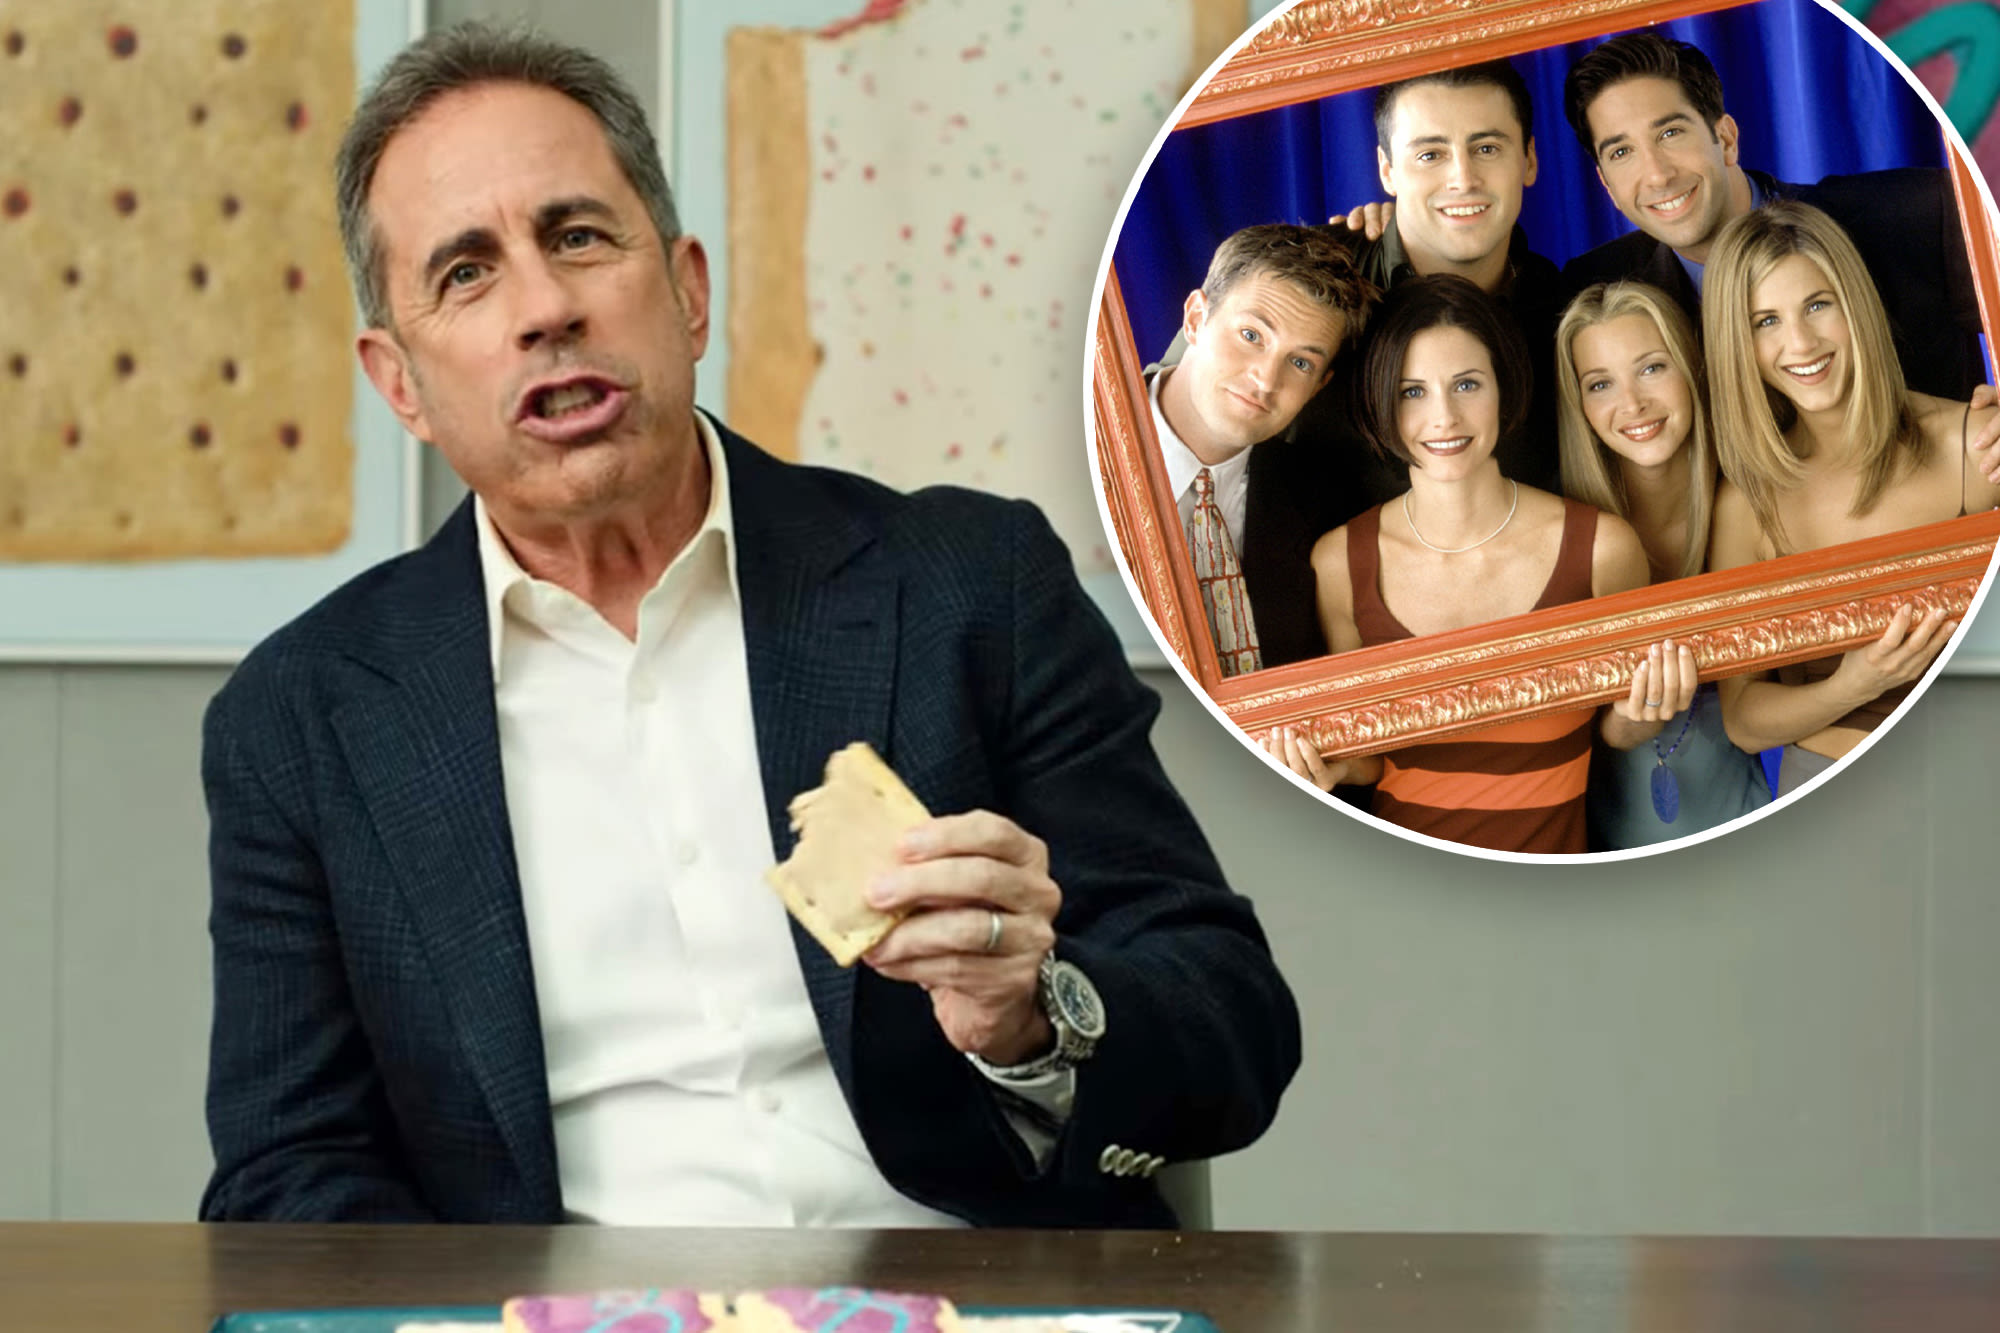 Jerry Seinfeld mocks ‘Friends’ for ripping off ‘Seinfeld’ characters